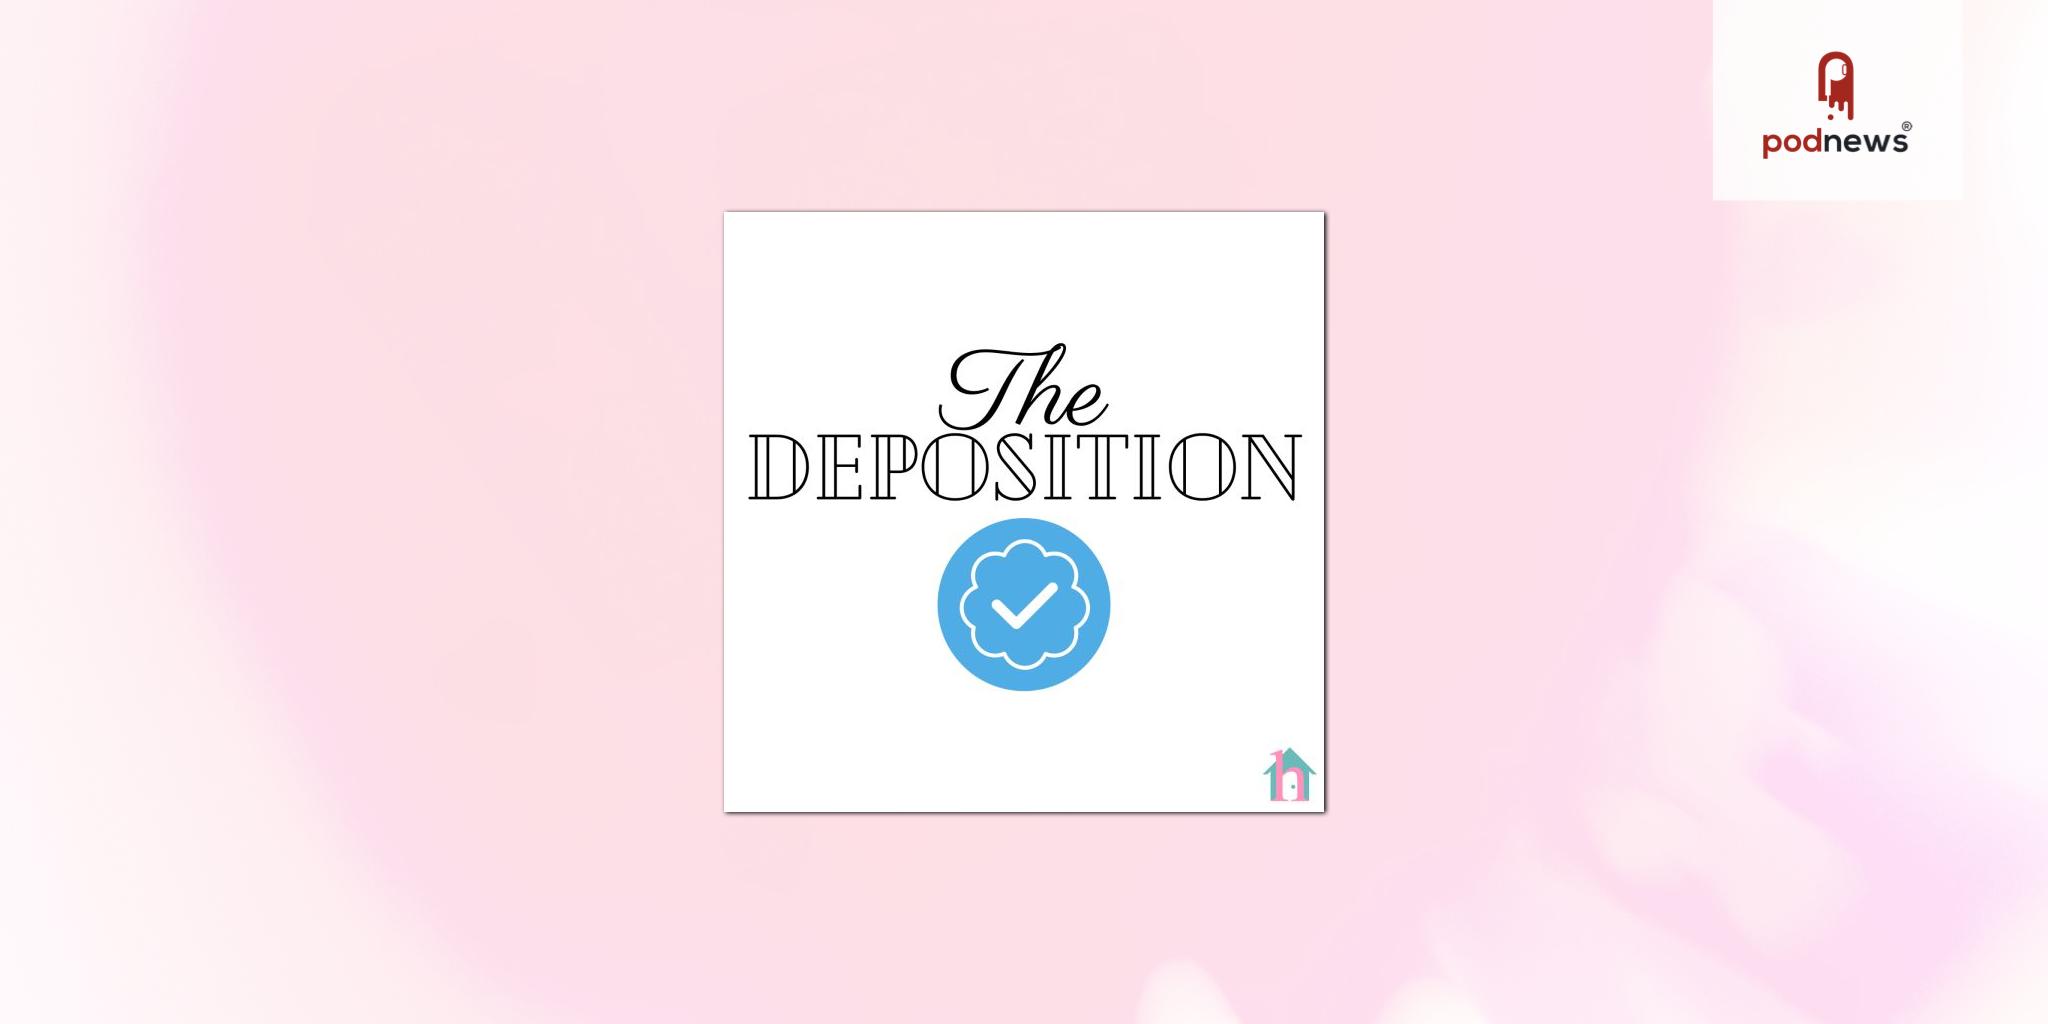 New podcast The Deposition presents a dramatic reading of the entire Musk deposition he wanted kept secret